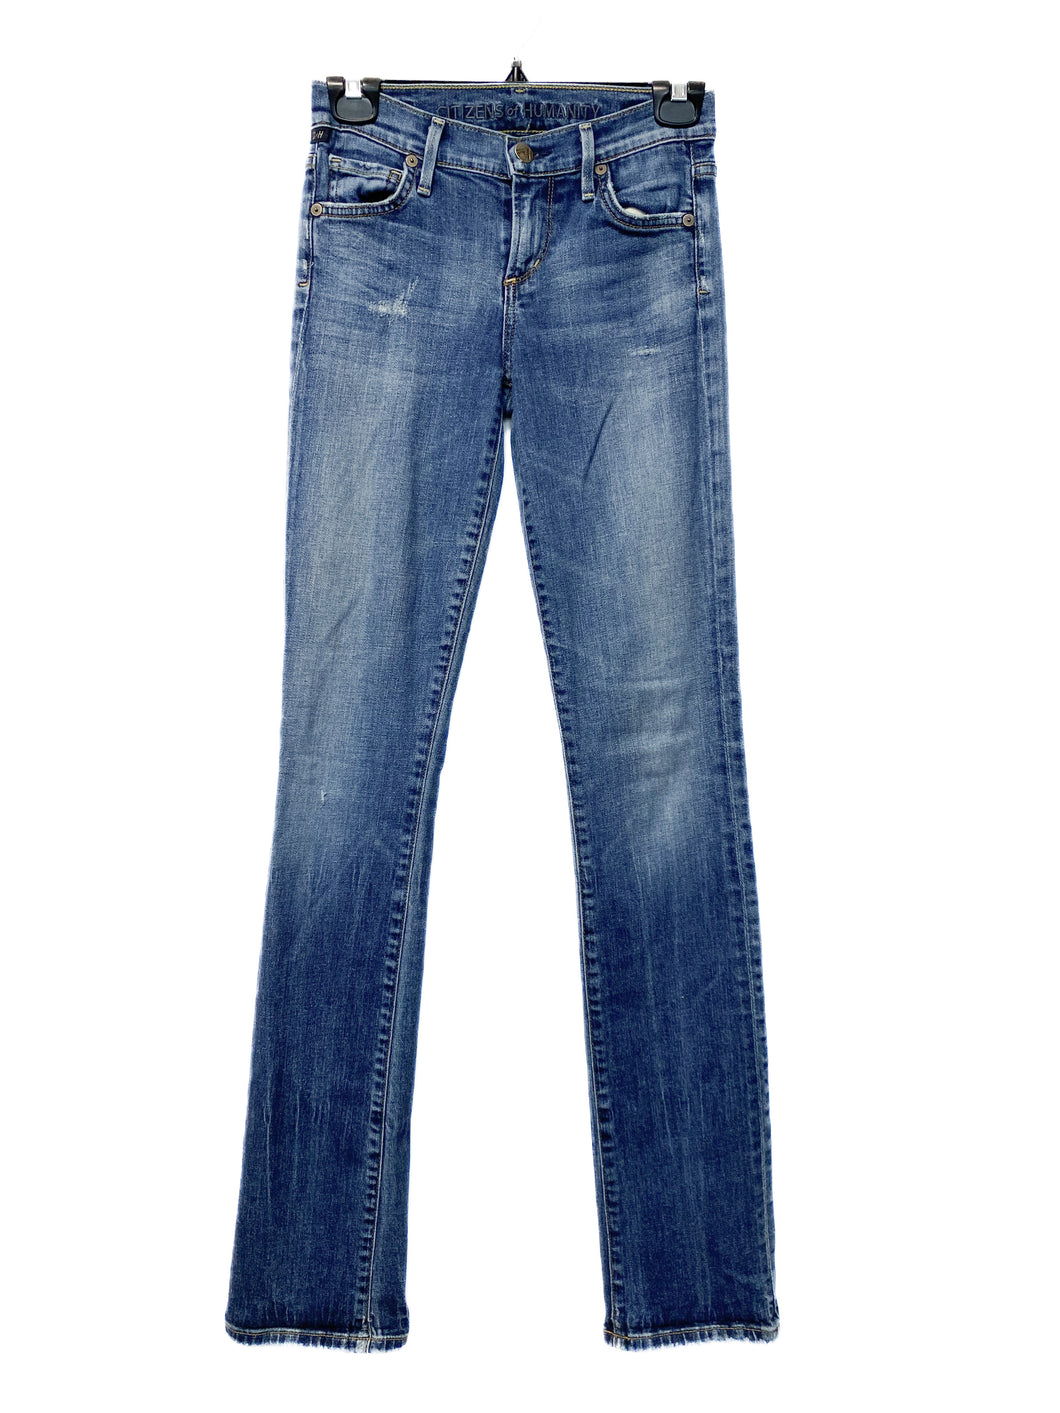 Citizens Of Humanity Jeans (24)